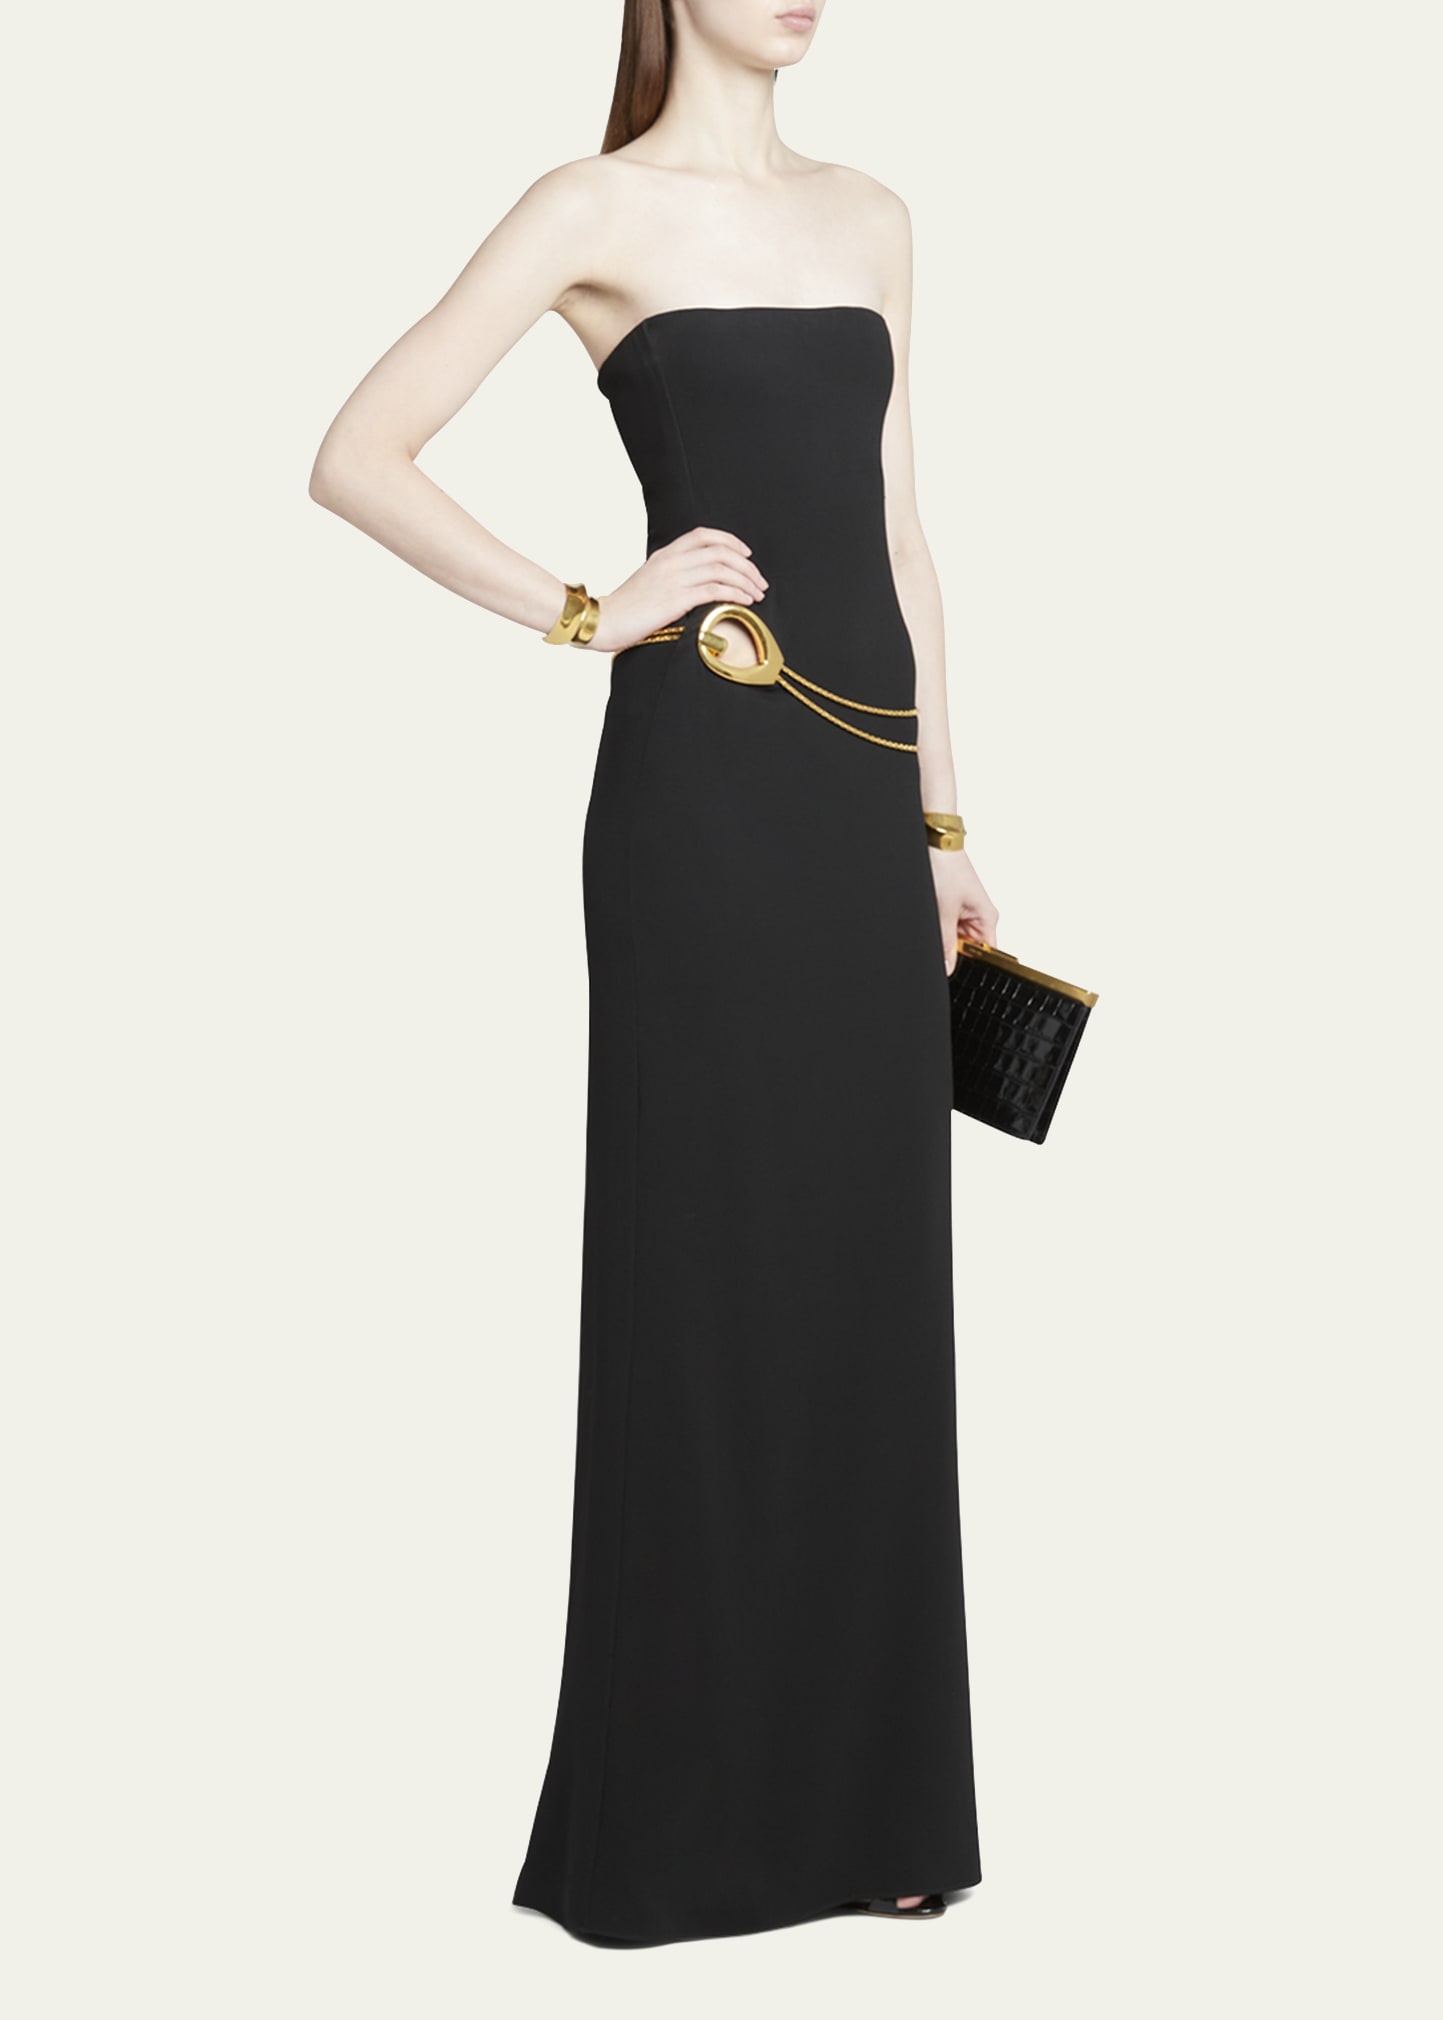 Stretch Sable Strapless Evening Dress with Cutout Detail - 2